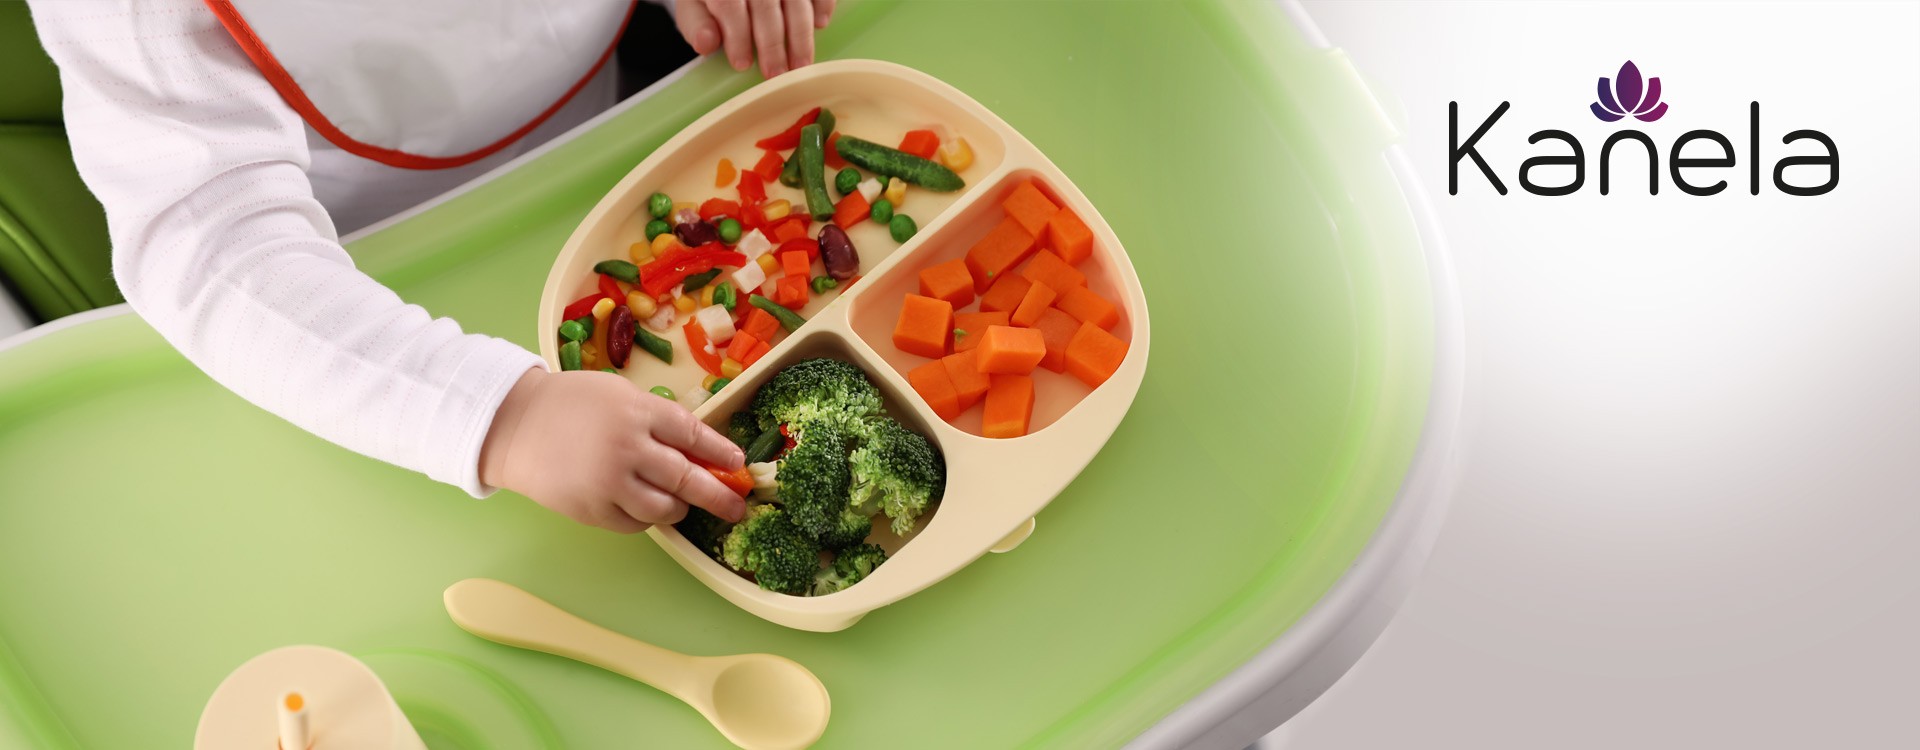 Nutrition for small children: the right cutlery makes eating fun